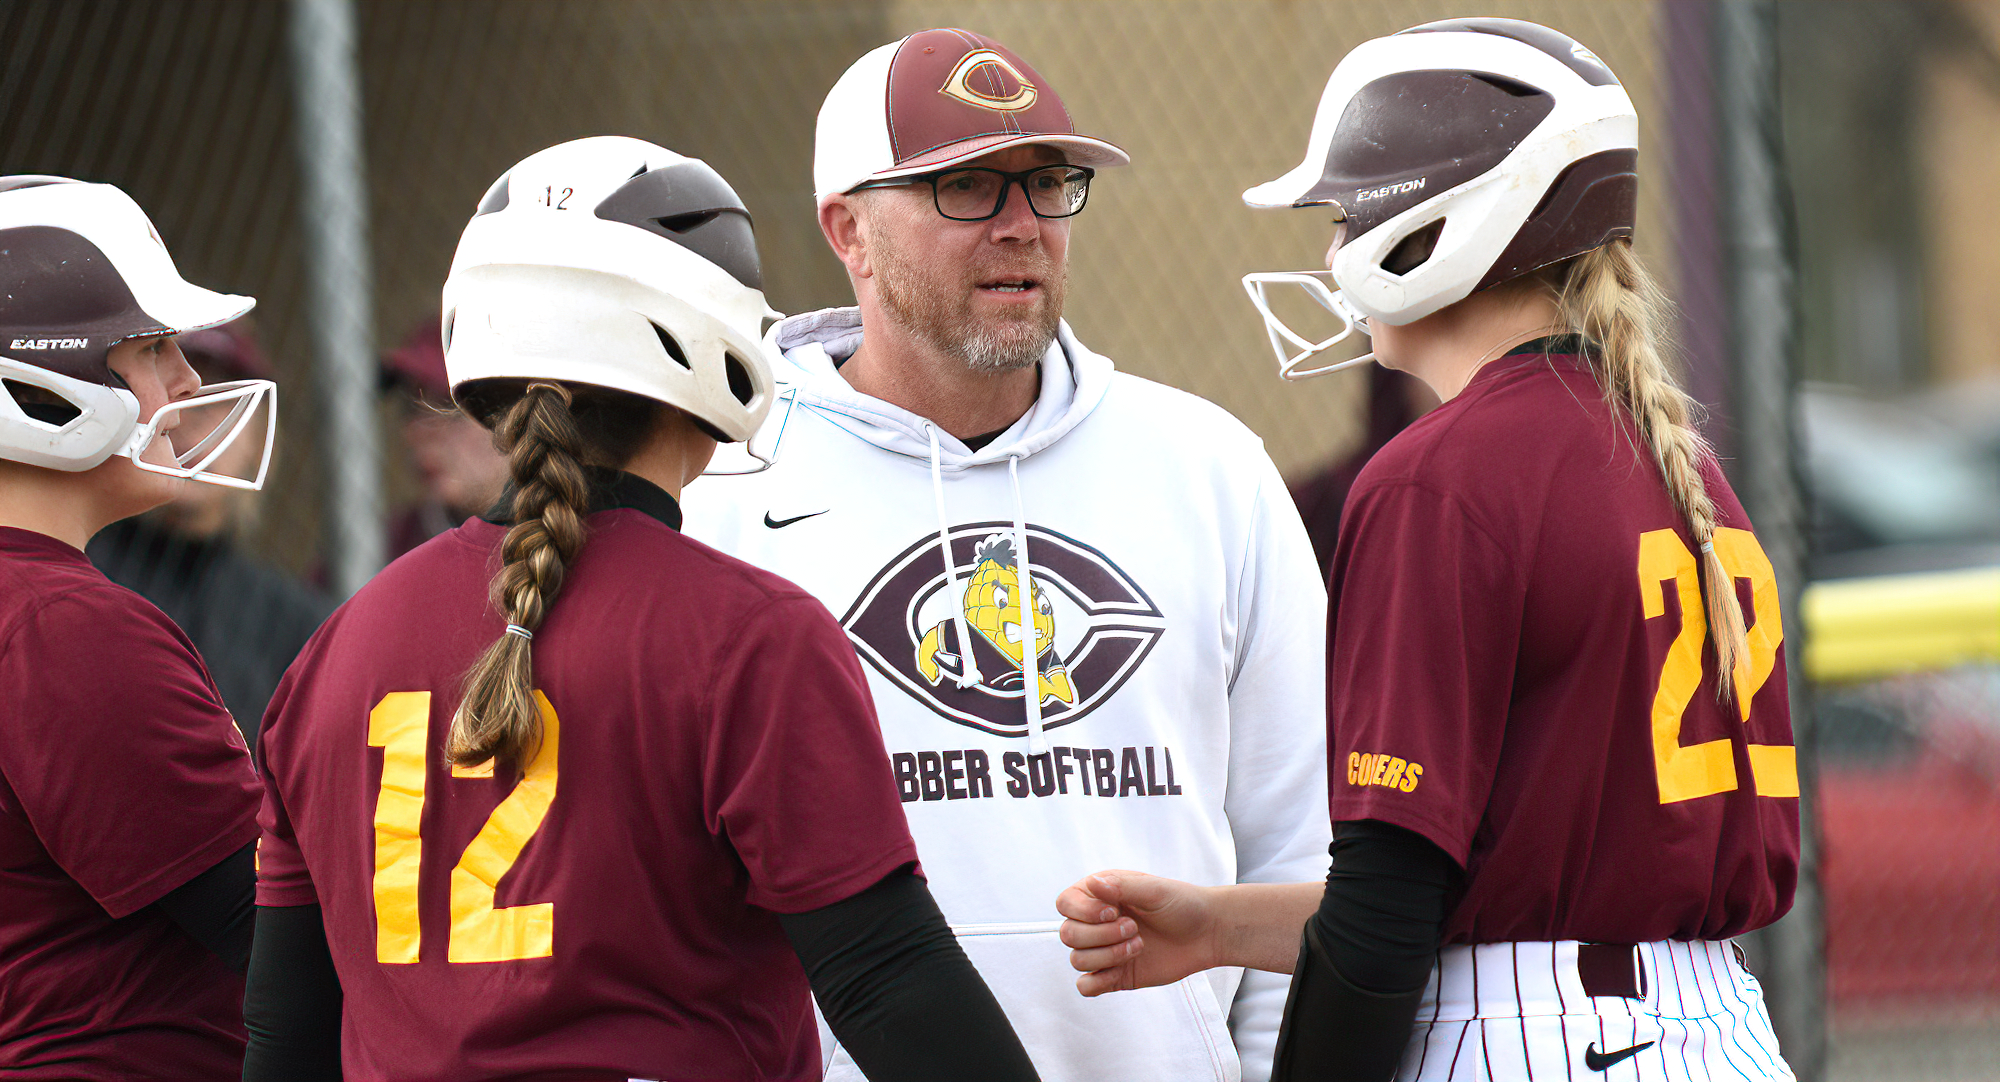 Chad Slyter announced that he is stepping down as head coach of Concordia. Slyter recently finished his seventh season at the helm CC.